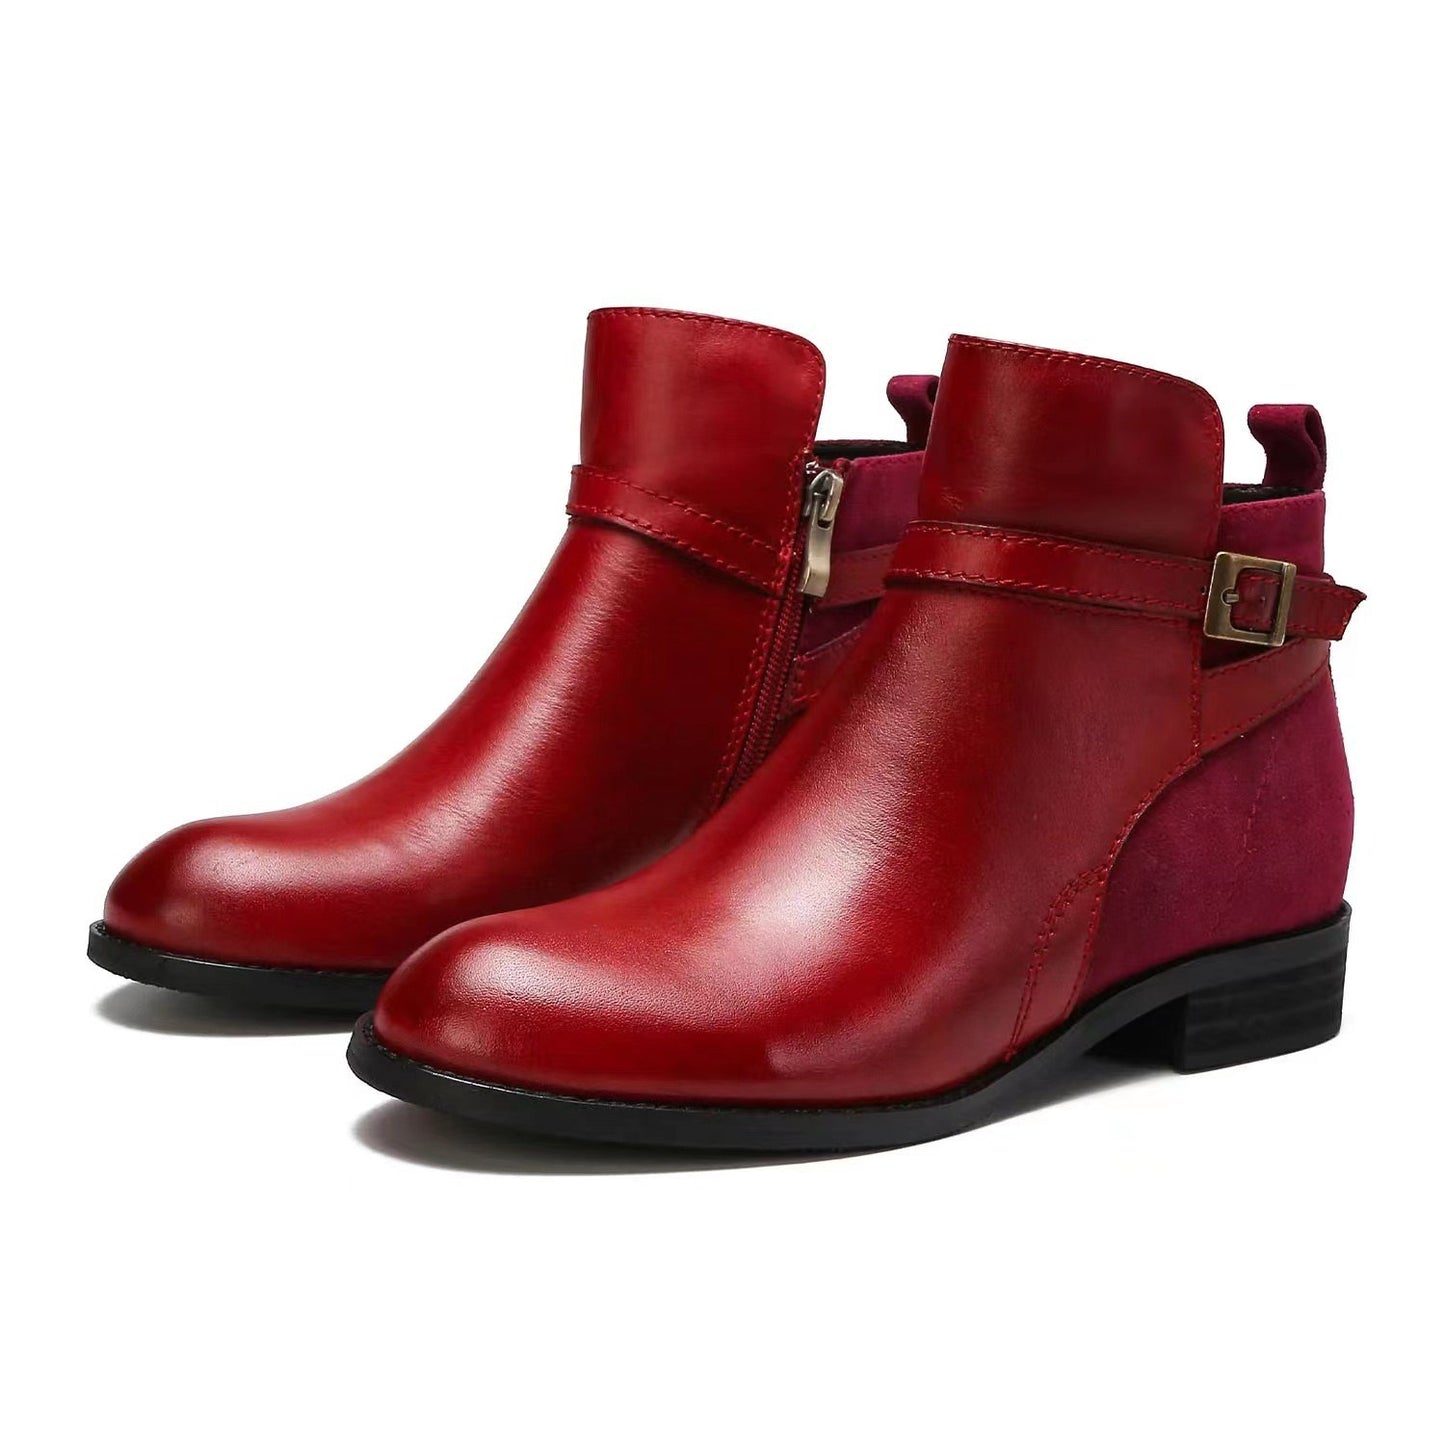 Leather Casual Flat Boots For Women